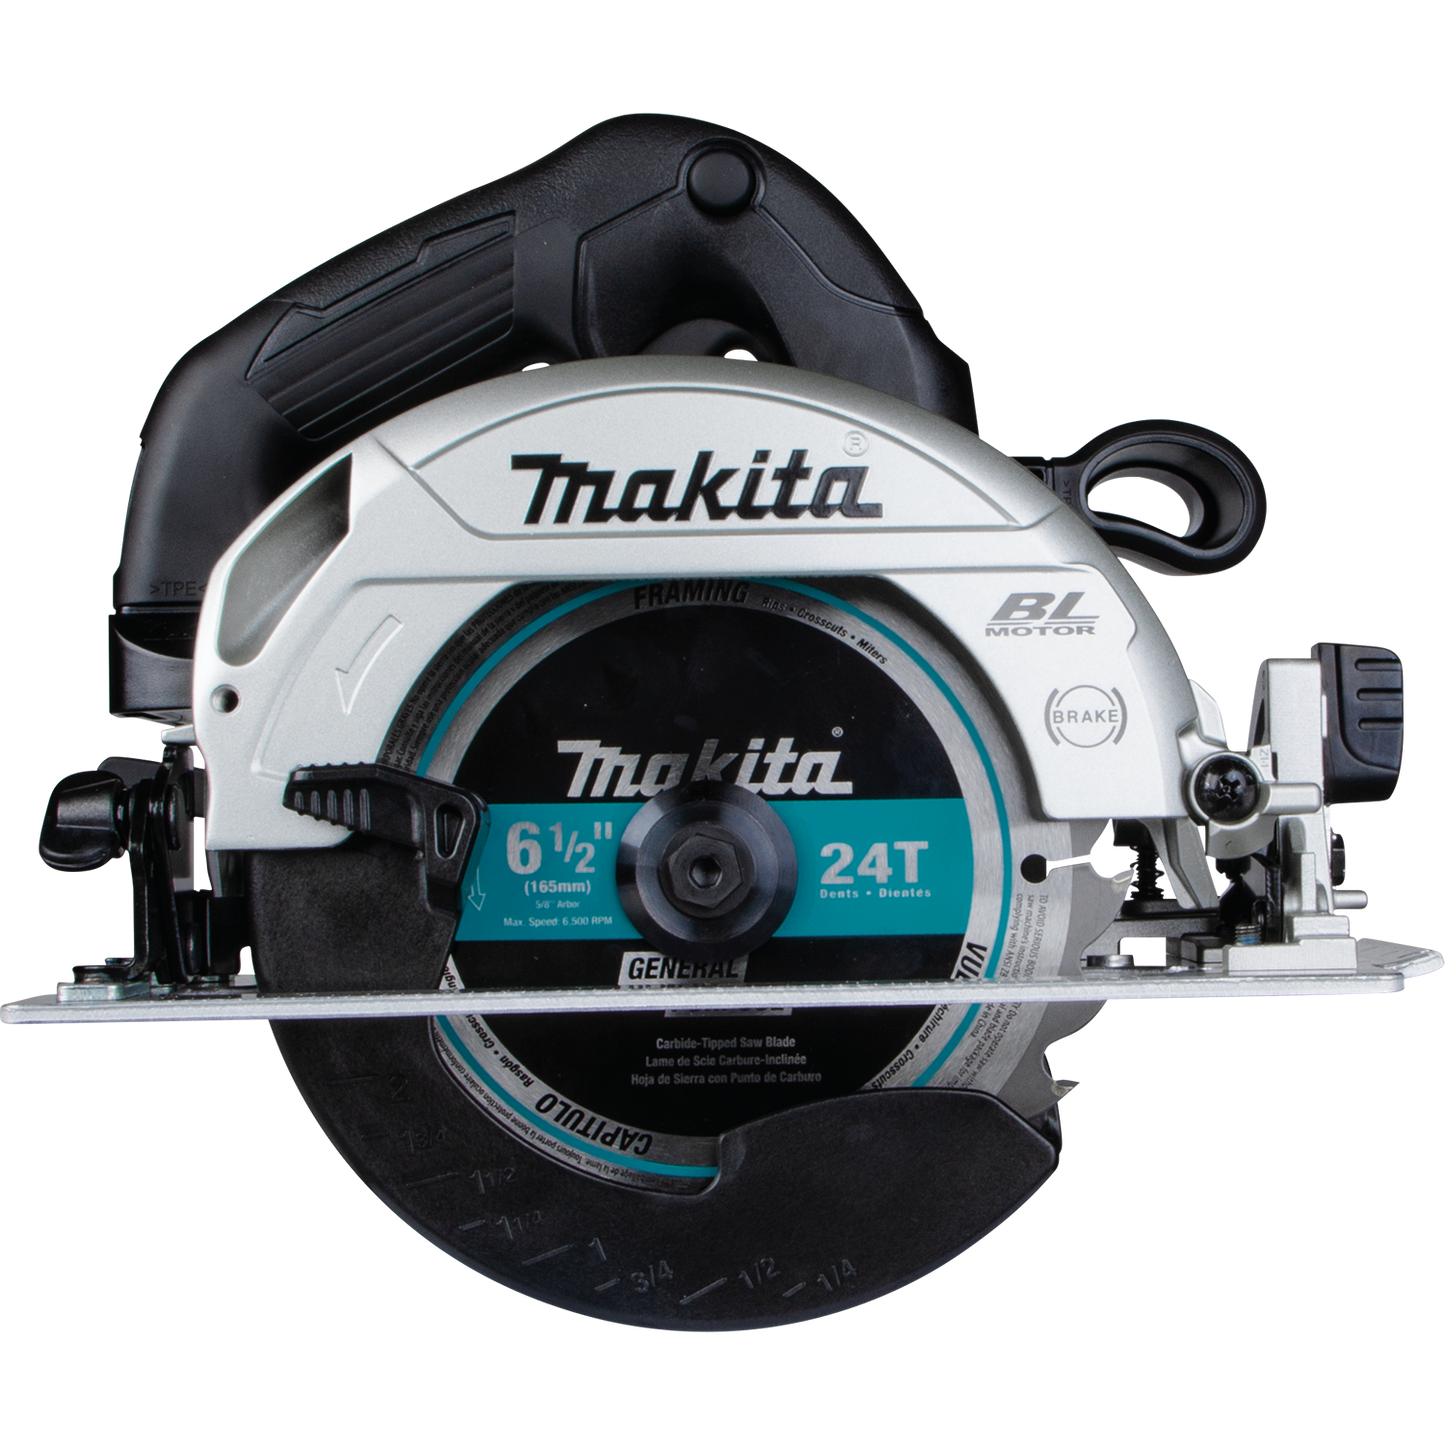 Makita Circular Saw 6 1/2 Inch 18 Volt Tool Only Factory Serviced